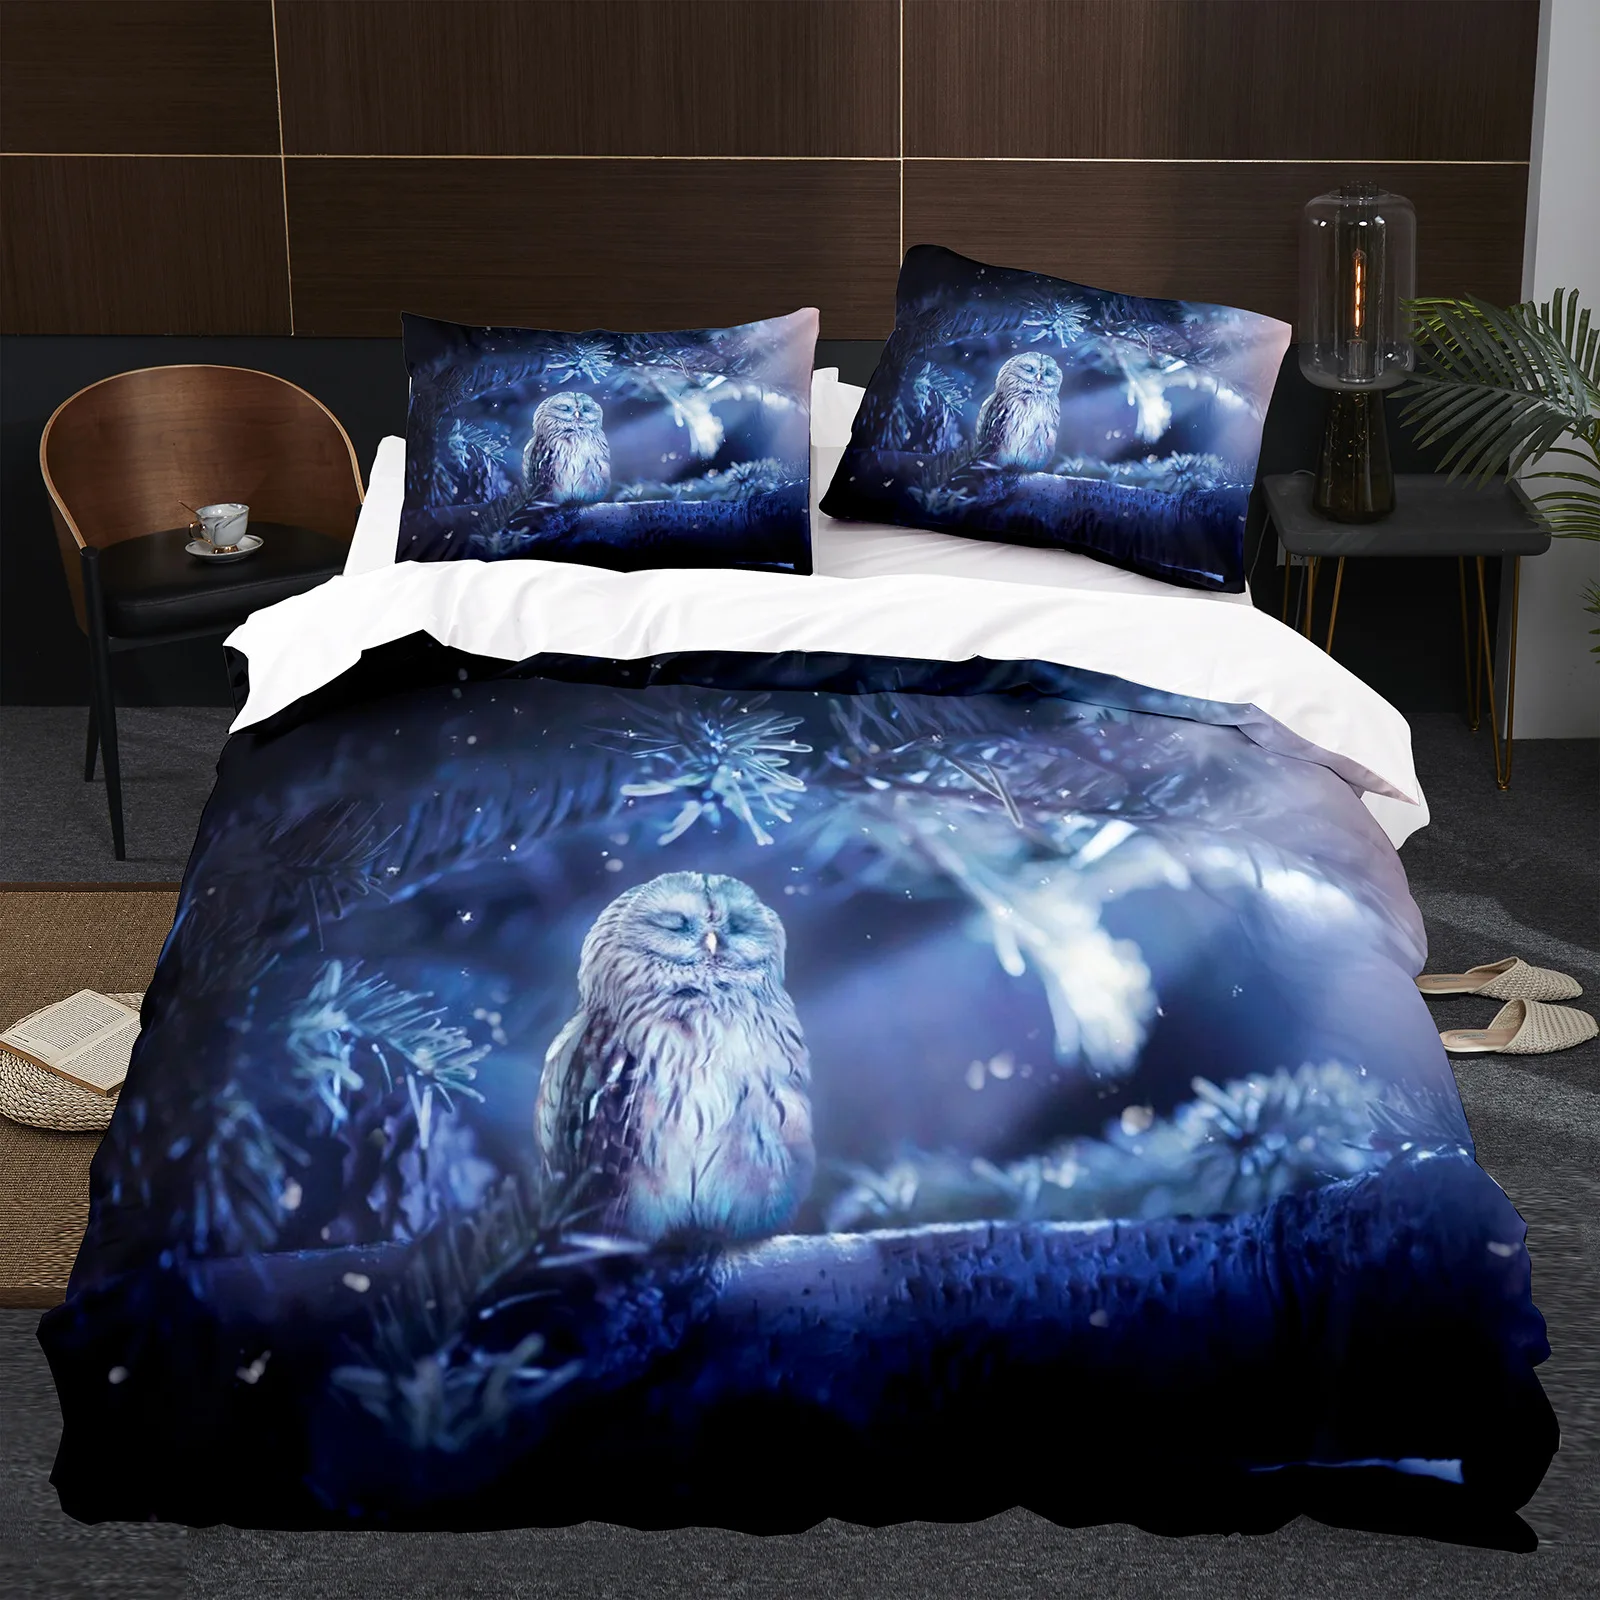 

Owl Duvet Cover Set 3D Safari Wildlife Print Comforter Cover Polyester Quilt Cover Bird Animal Personalized Nighthawk Queen Size